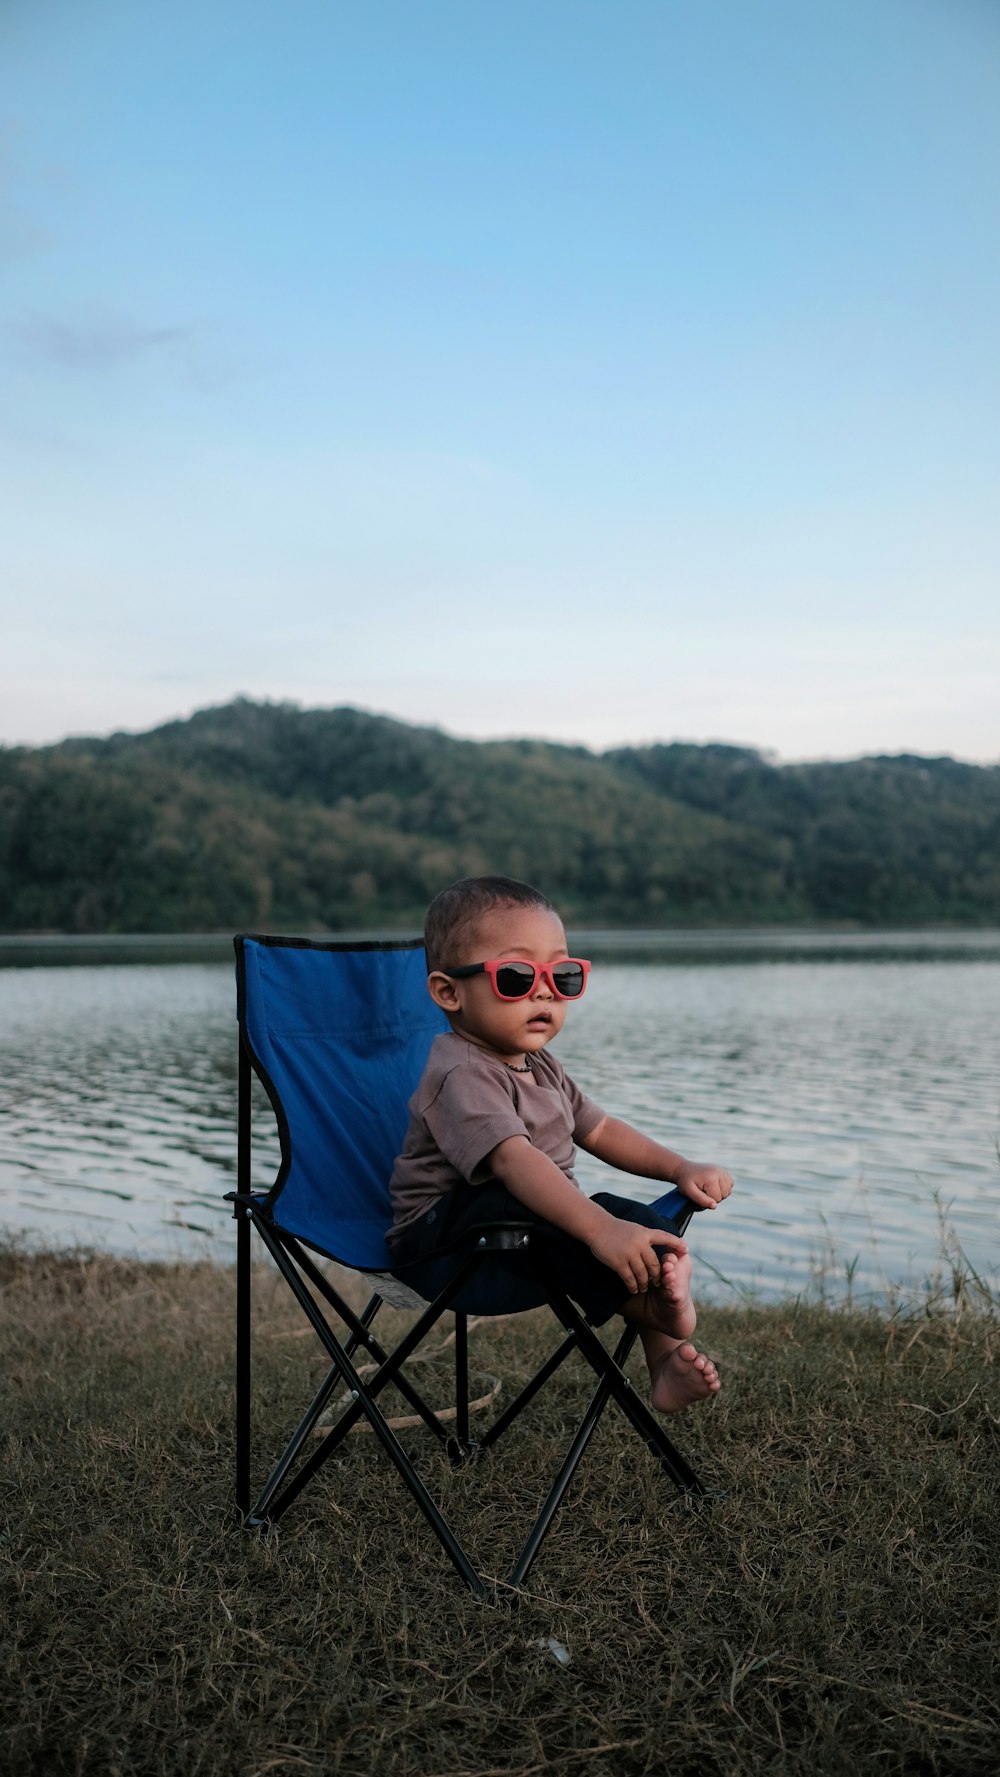 boy in gray shirt sitting on blue camping chair near body of water